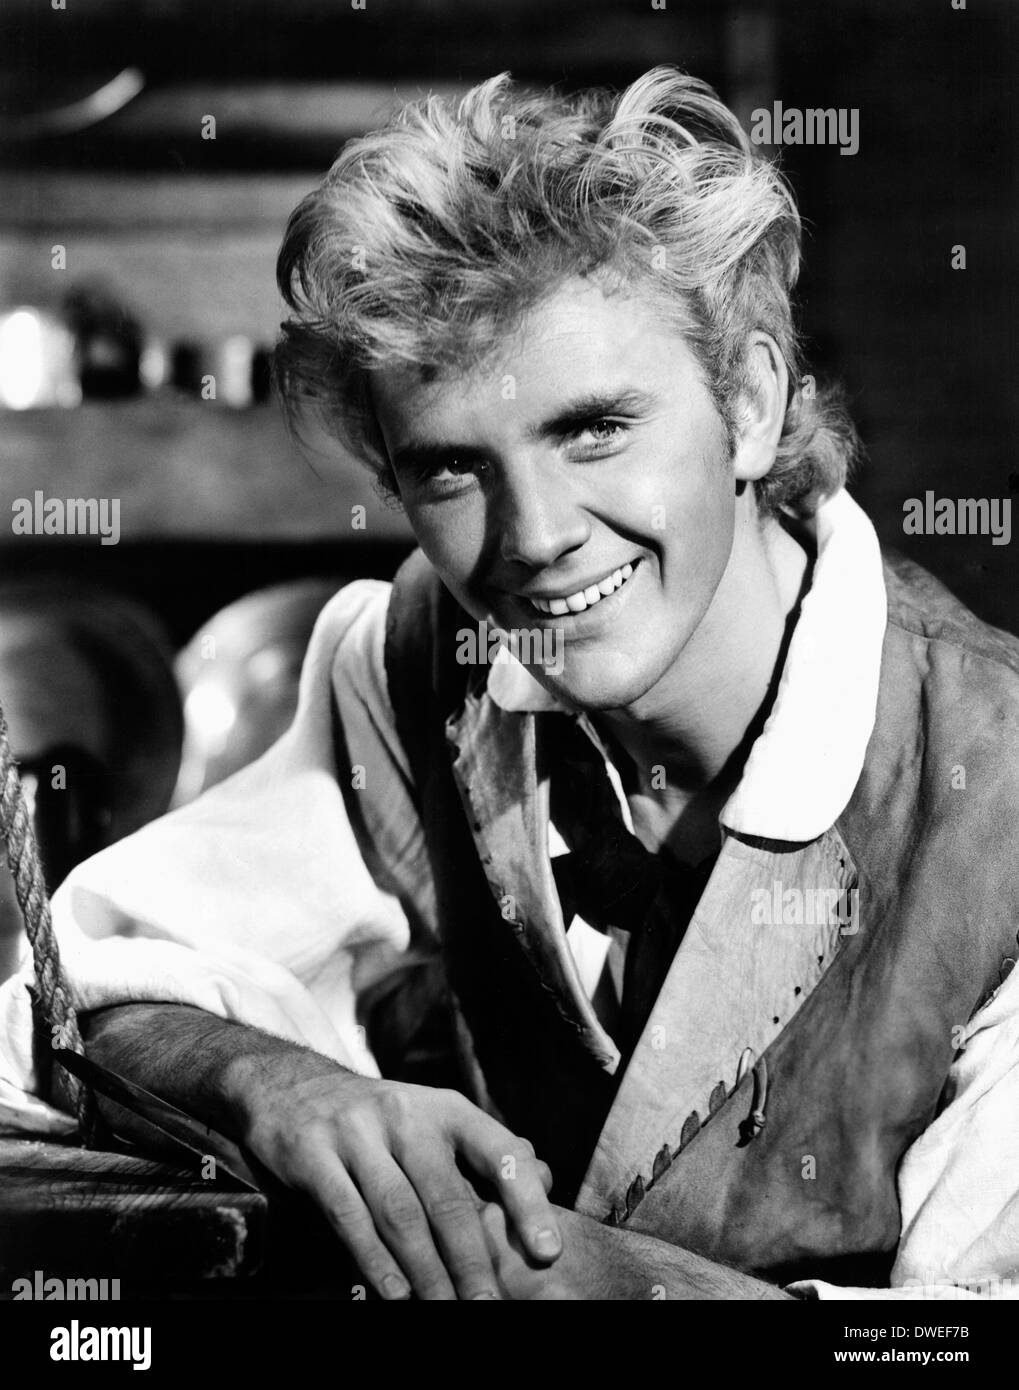 Terence Stamp, on-set of the Film, "Billy Budd" directed by Peter Ustinov, 1962 Stock Photo